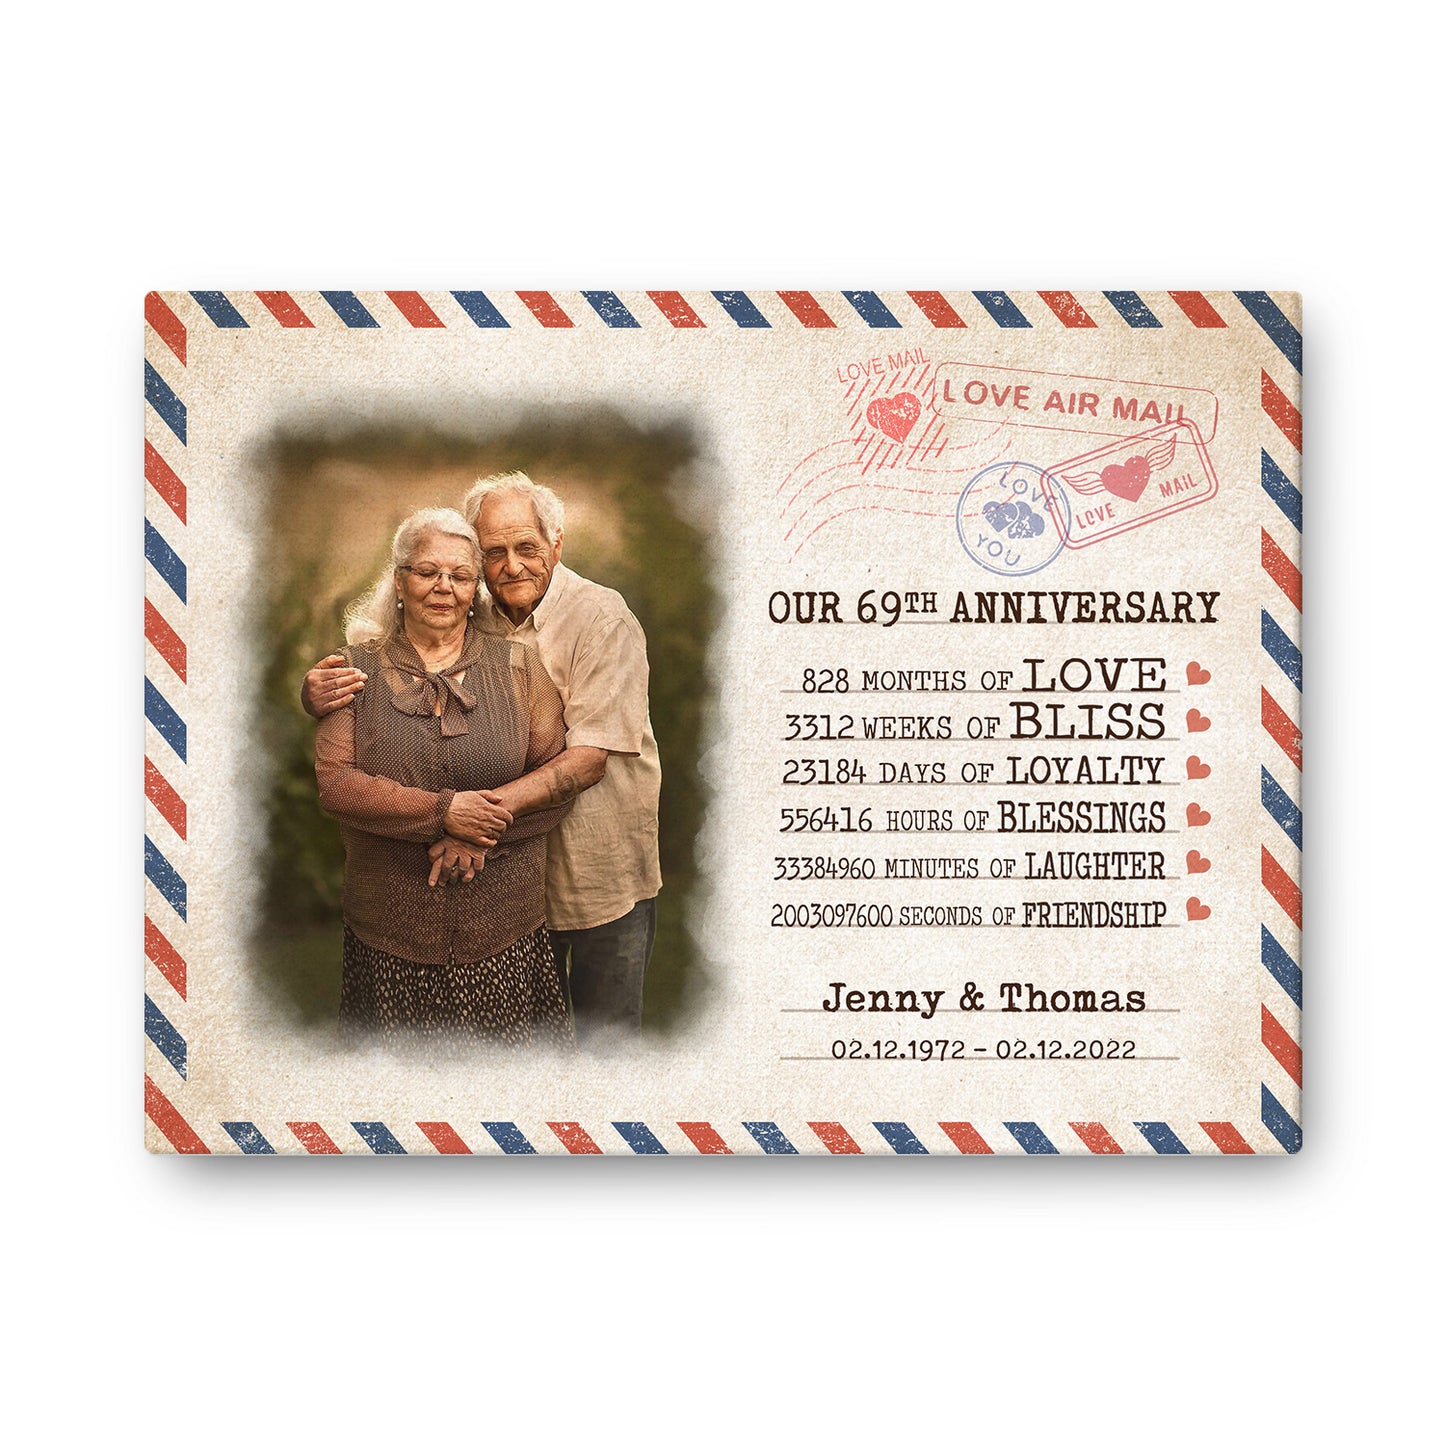 Our 69th Anniversary Letter Valentine Gift Personalized Canvas